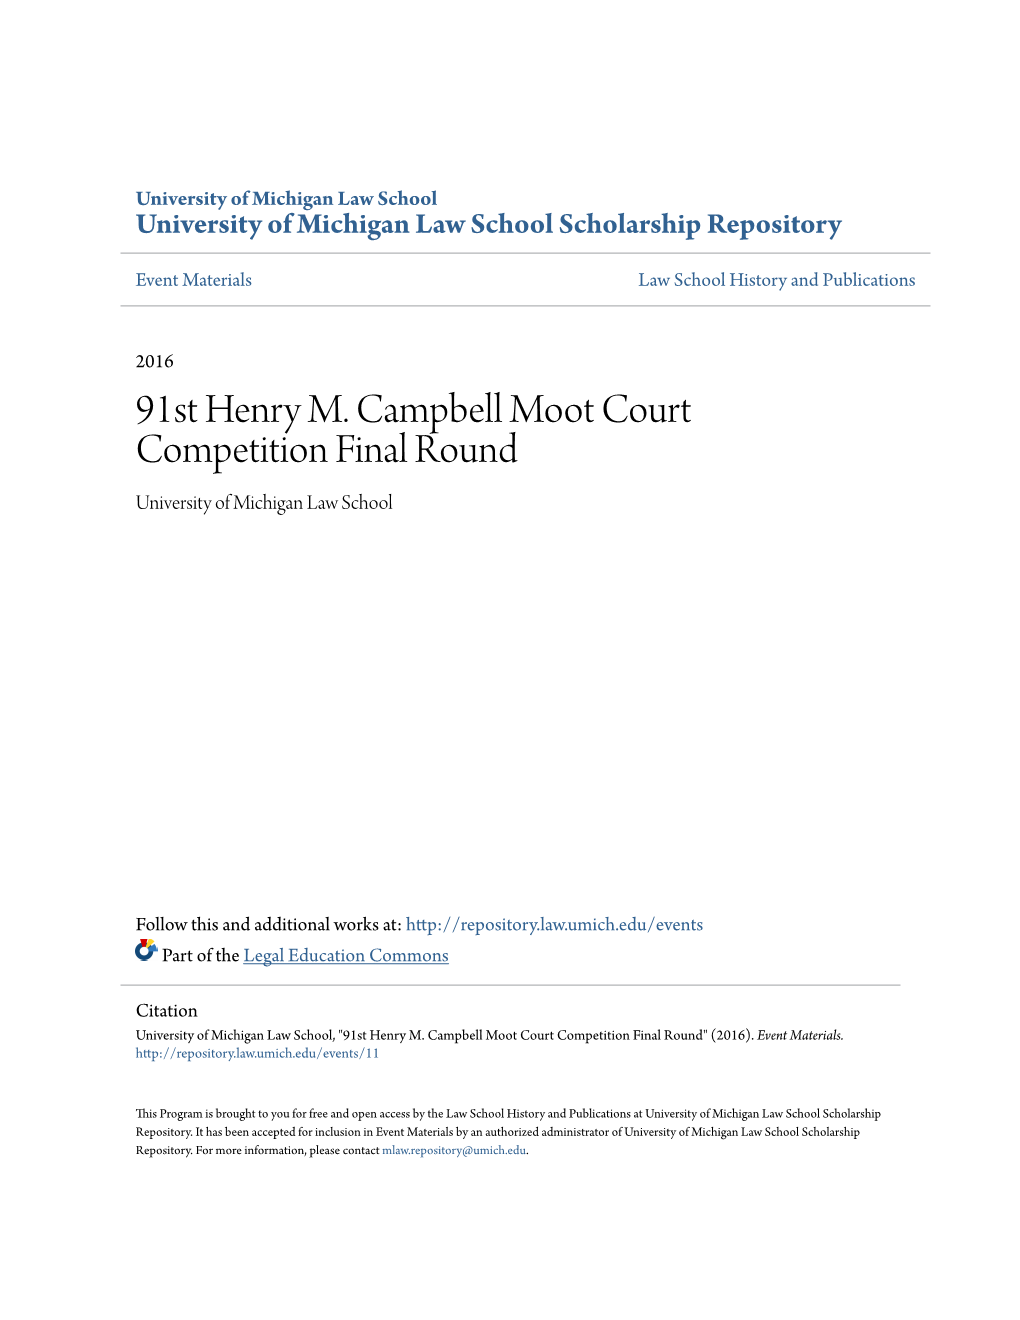 91St Henry M. Campbell Moot Court Competition Final Round University of Michigan Law School